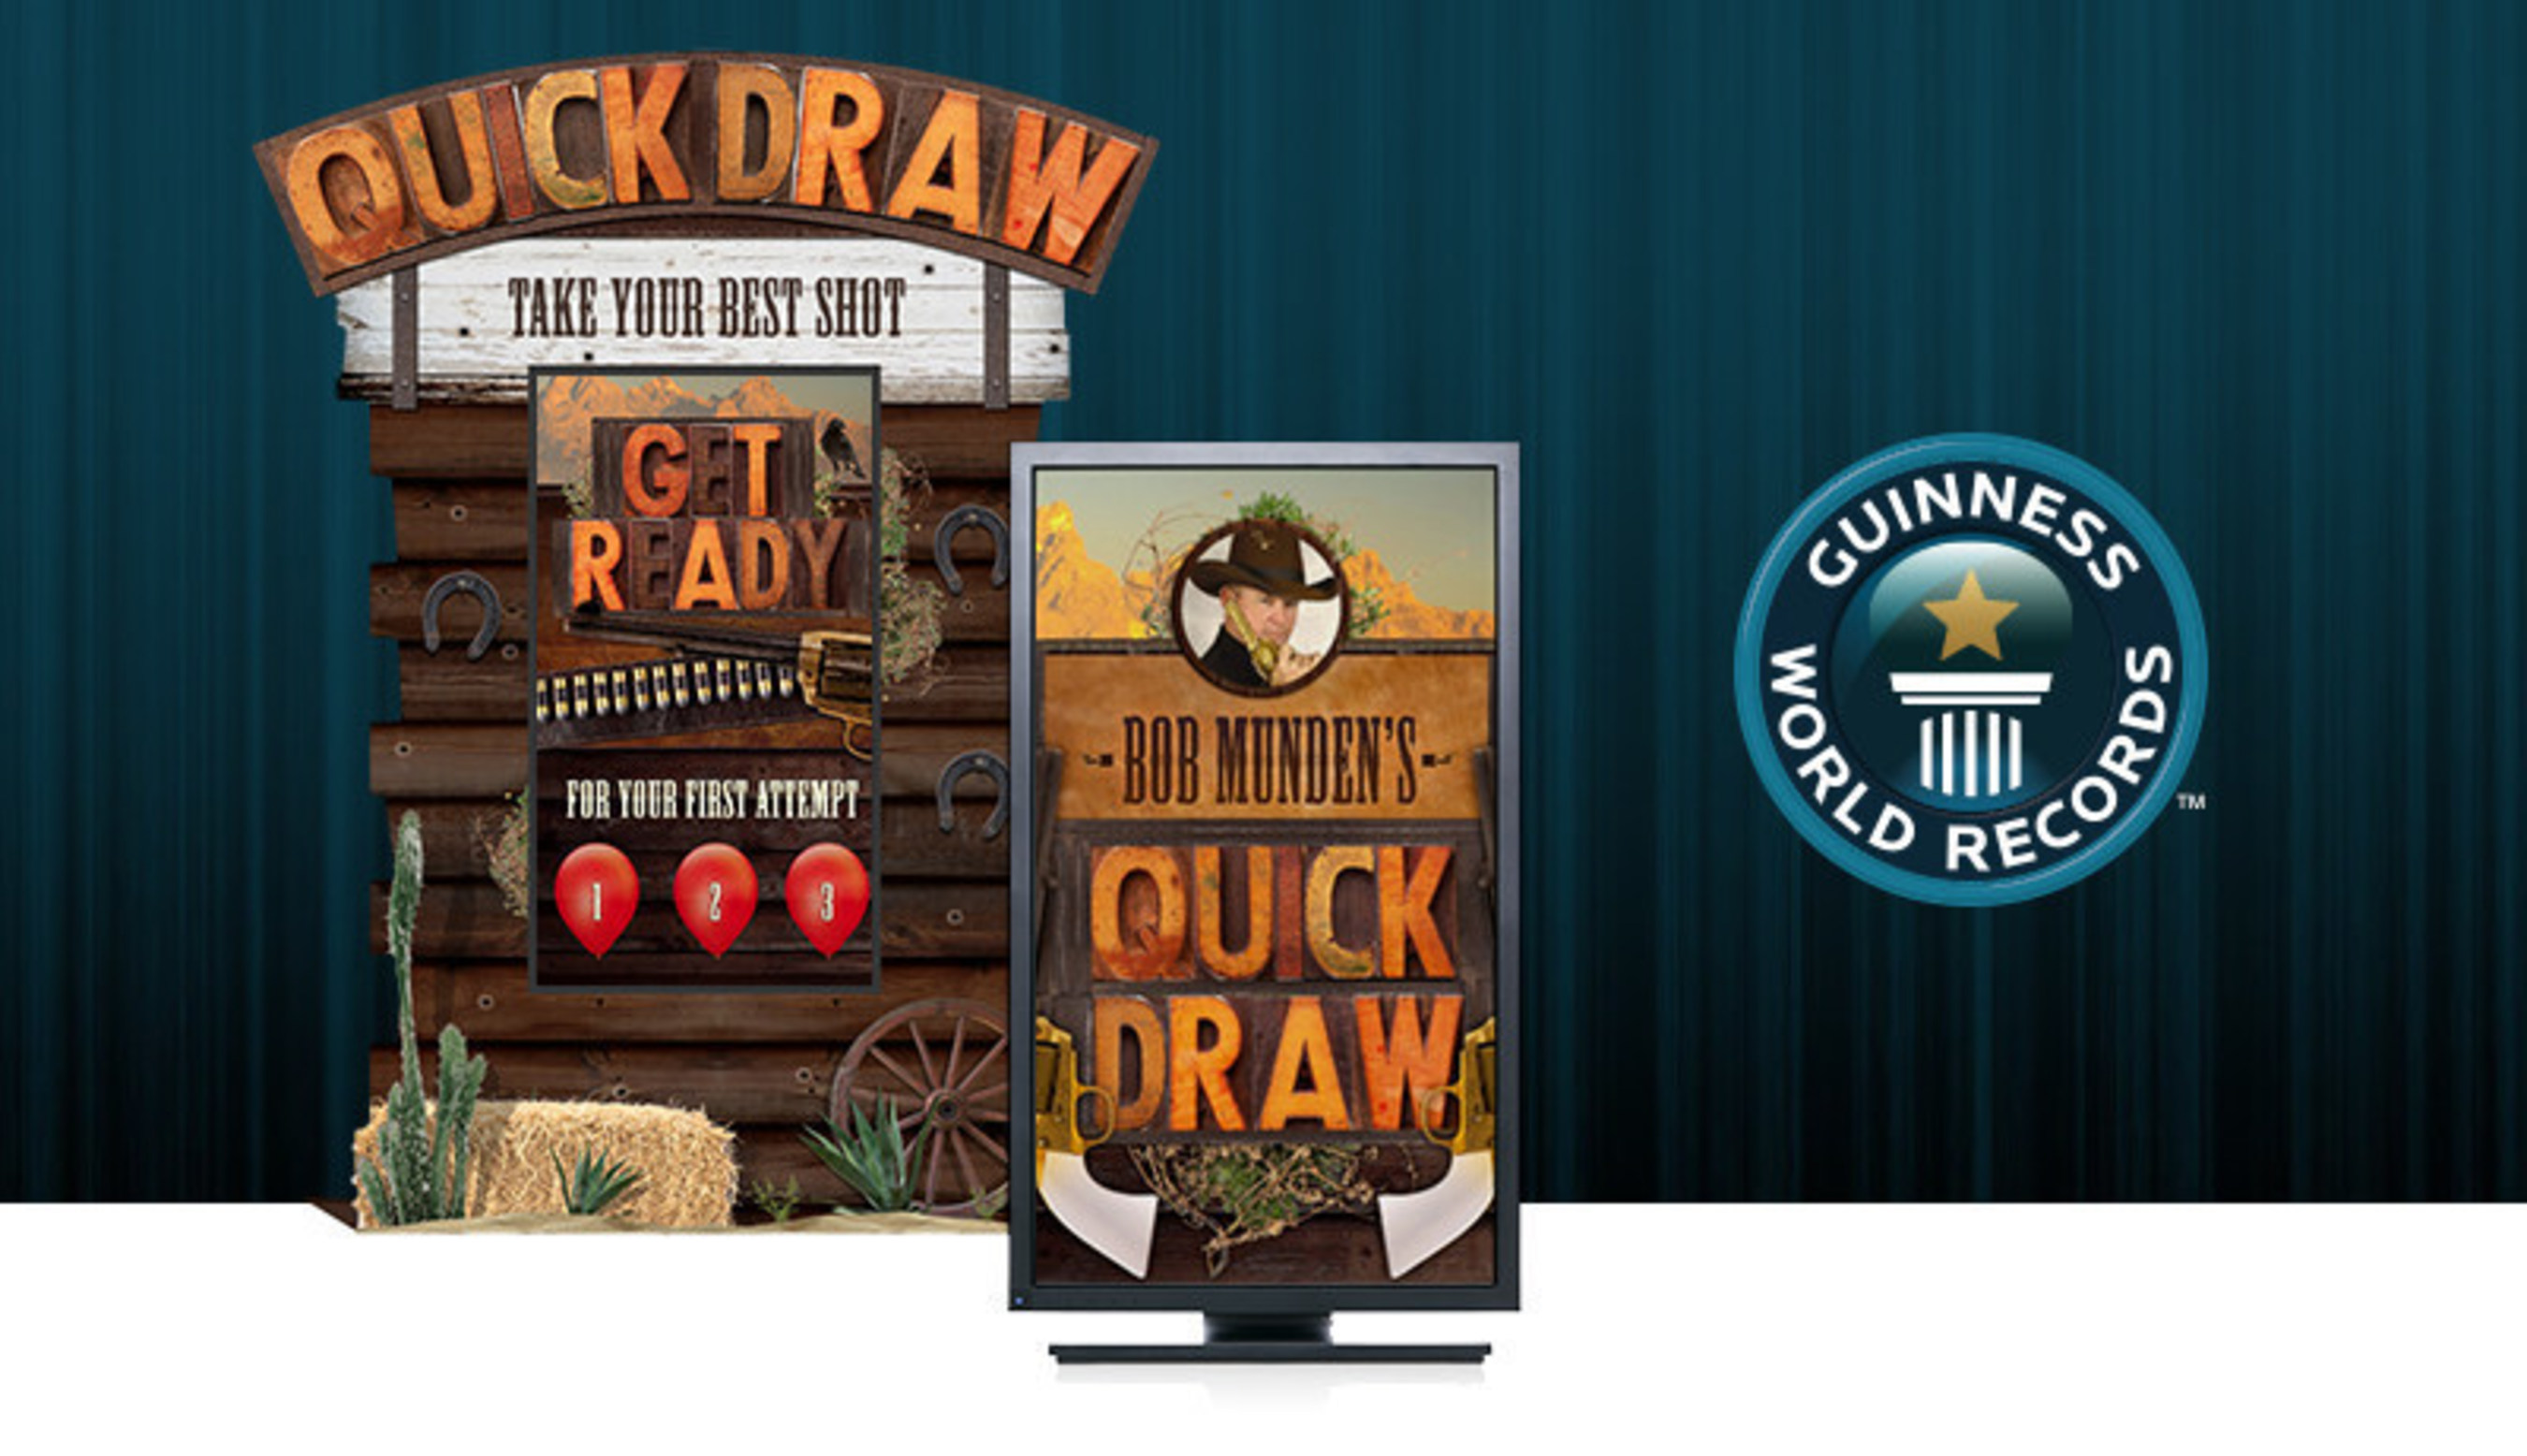 QUICKDRAW, one of the new experiential interactive media prototypes created by GoConvergence for Guinness World Records Attractions.